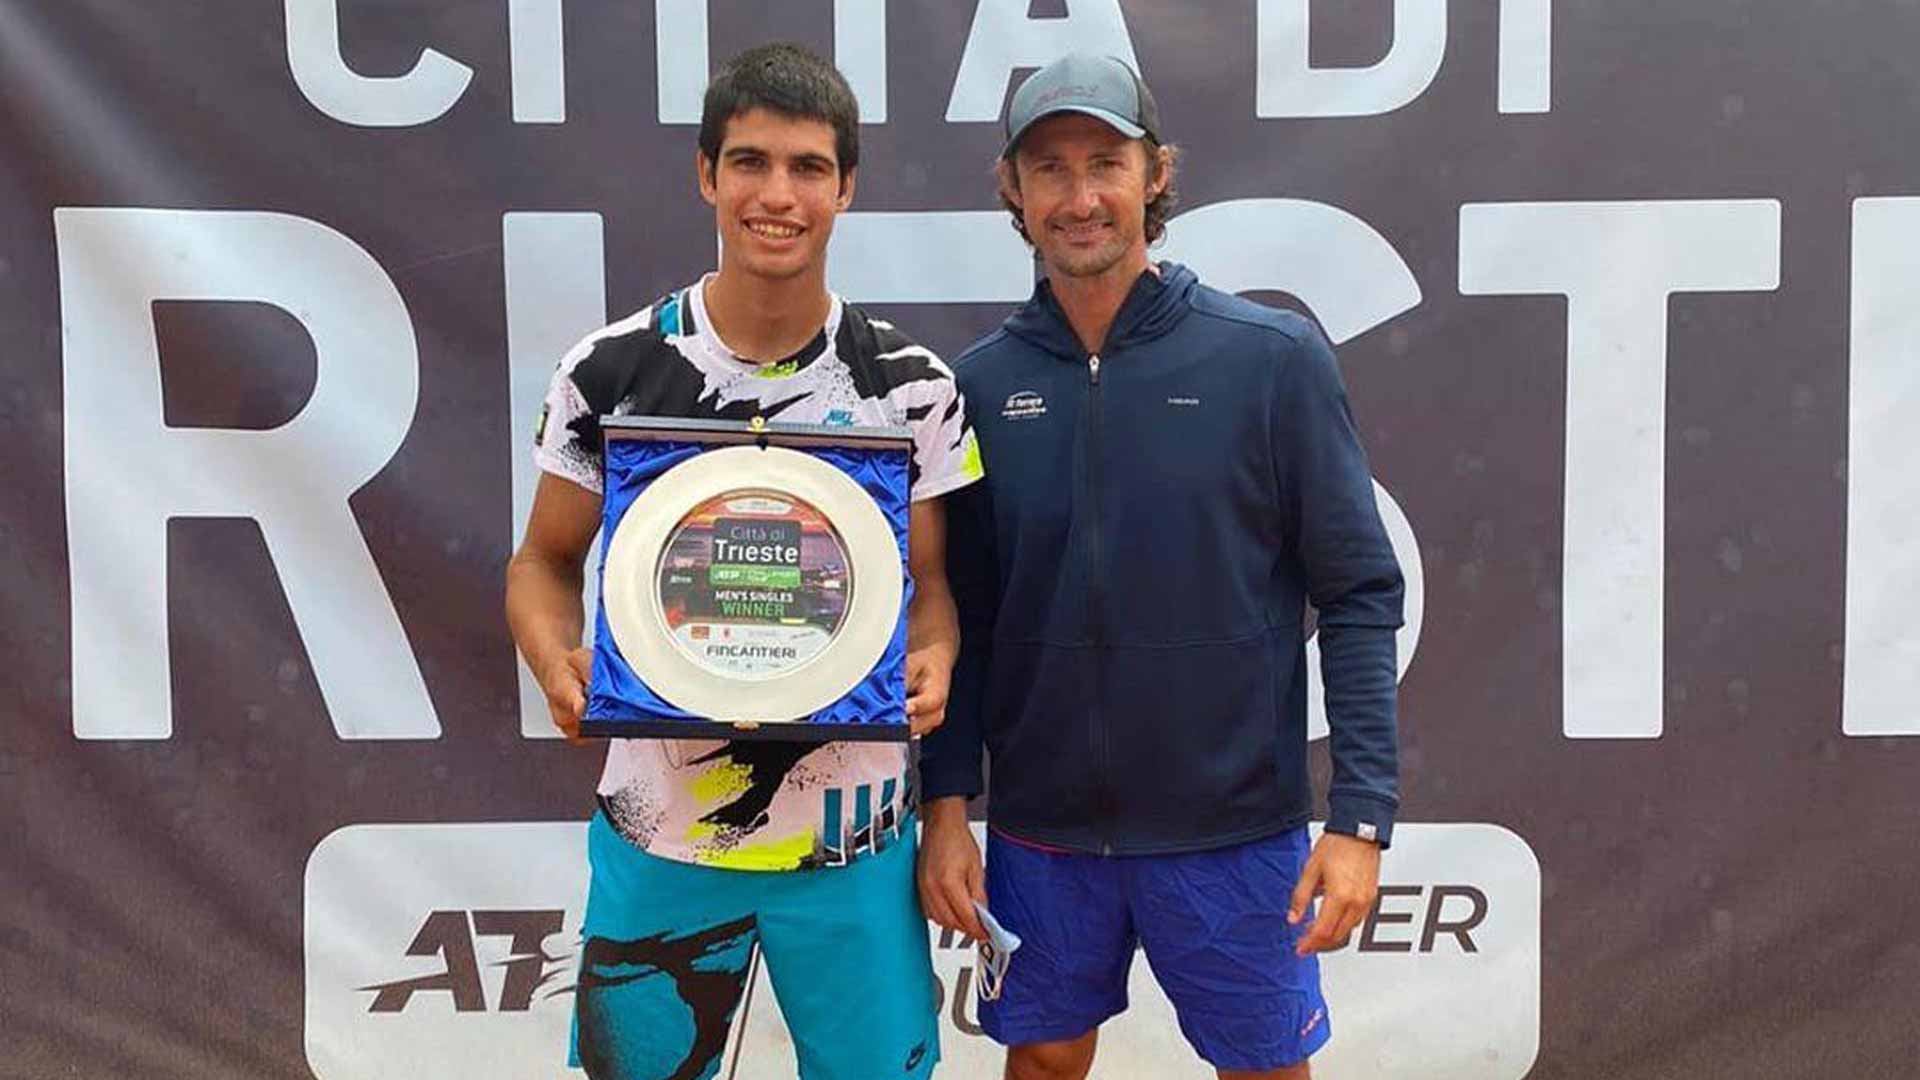 Carlos Alcaraz celebrates his first ATP Challenger Tour title with coach and former World No. 1 Juan Carlos Ferrero.